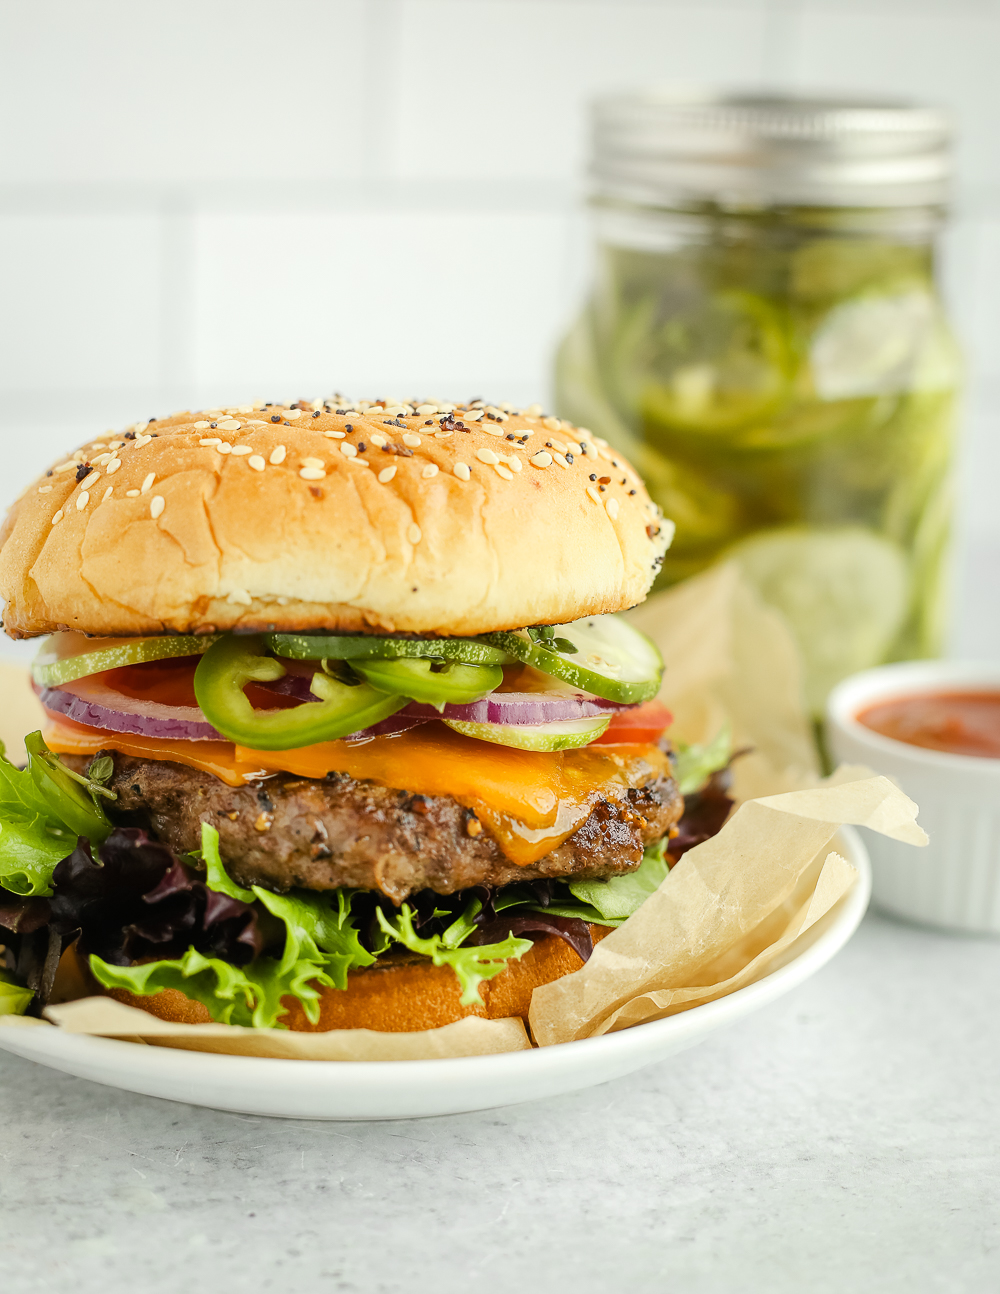 Side view of a classic beef burger on a toasted bun with a pickle pairing of cucumbers, jalapeños, and summer herbs, served on a small white dish with the jar of pickles in the background